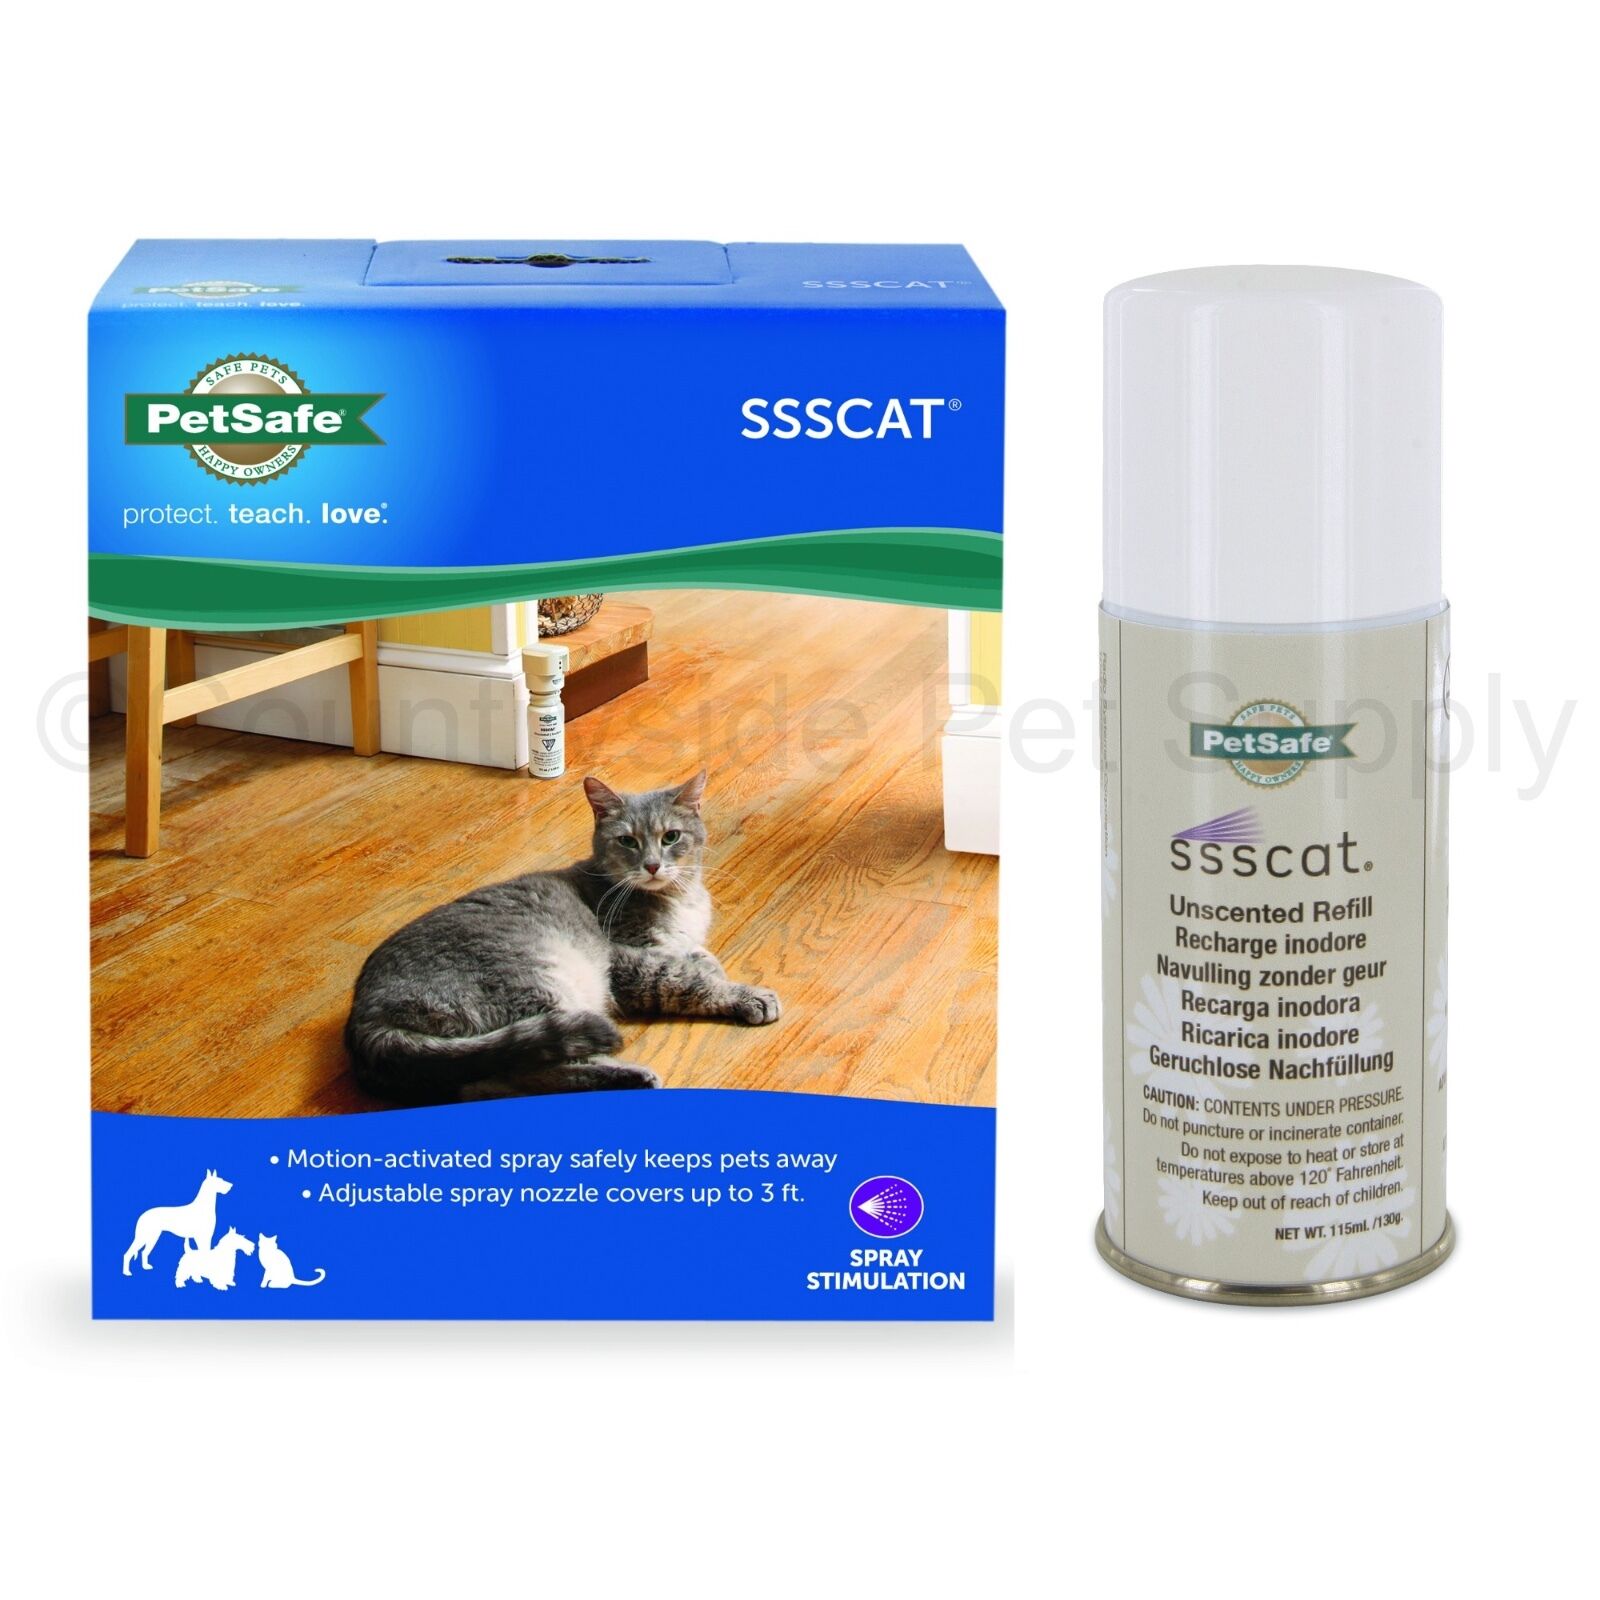 Ssscat Spray Deterrent For Pets Ppd00-16168 W/ Extra Spray Refill Ppd17-16165